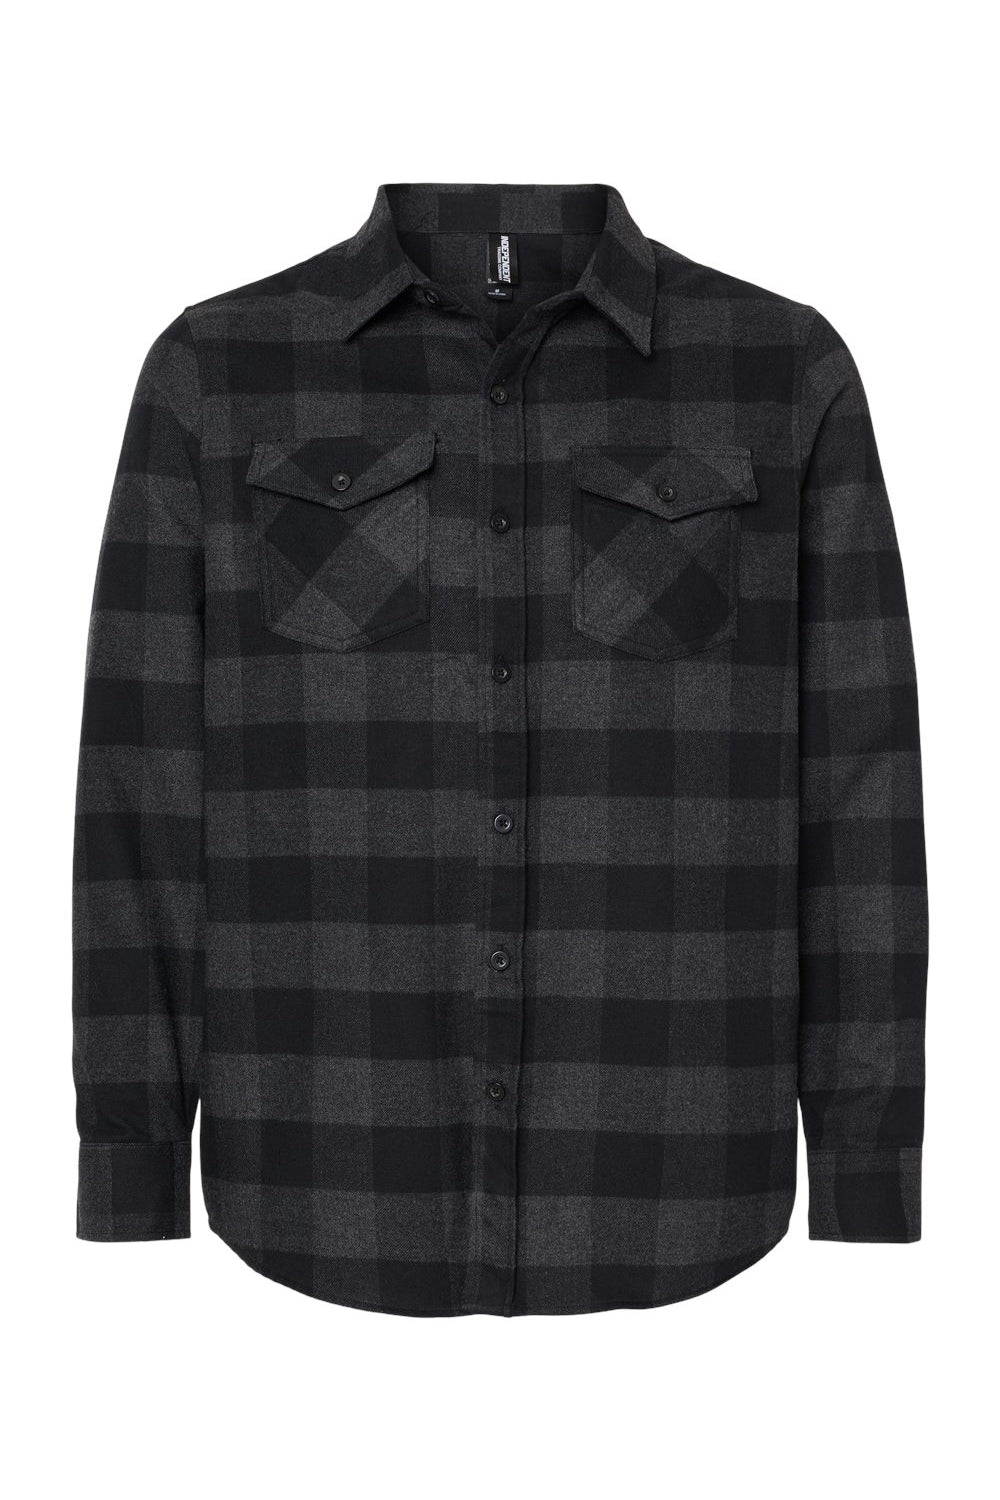 Independent Trading Co. EXP50F Mens Long Sleeve Button Down Flannel Shirt w/ Double Pockets Heather Charcoal Grey/Black Flat Front